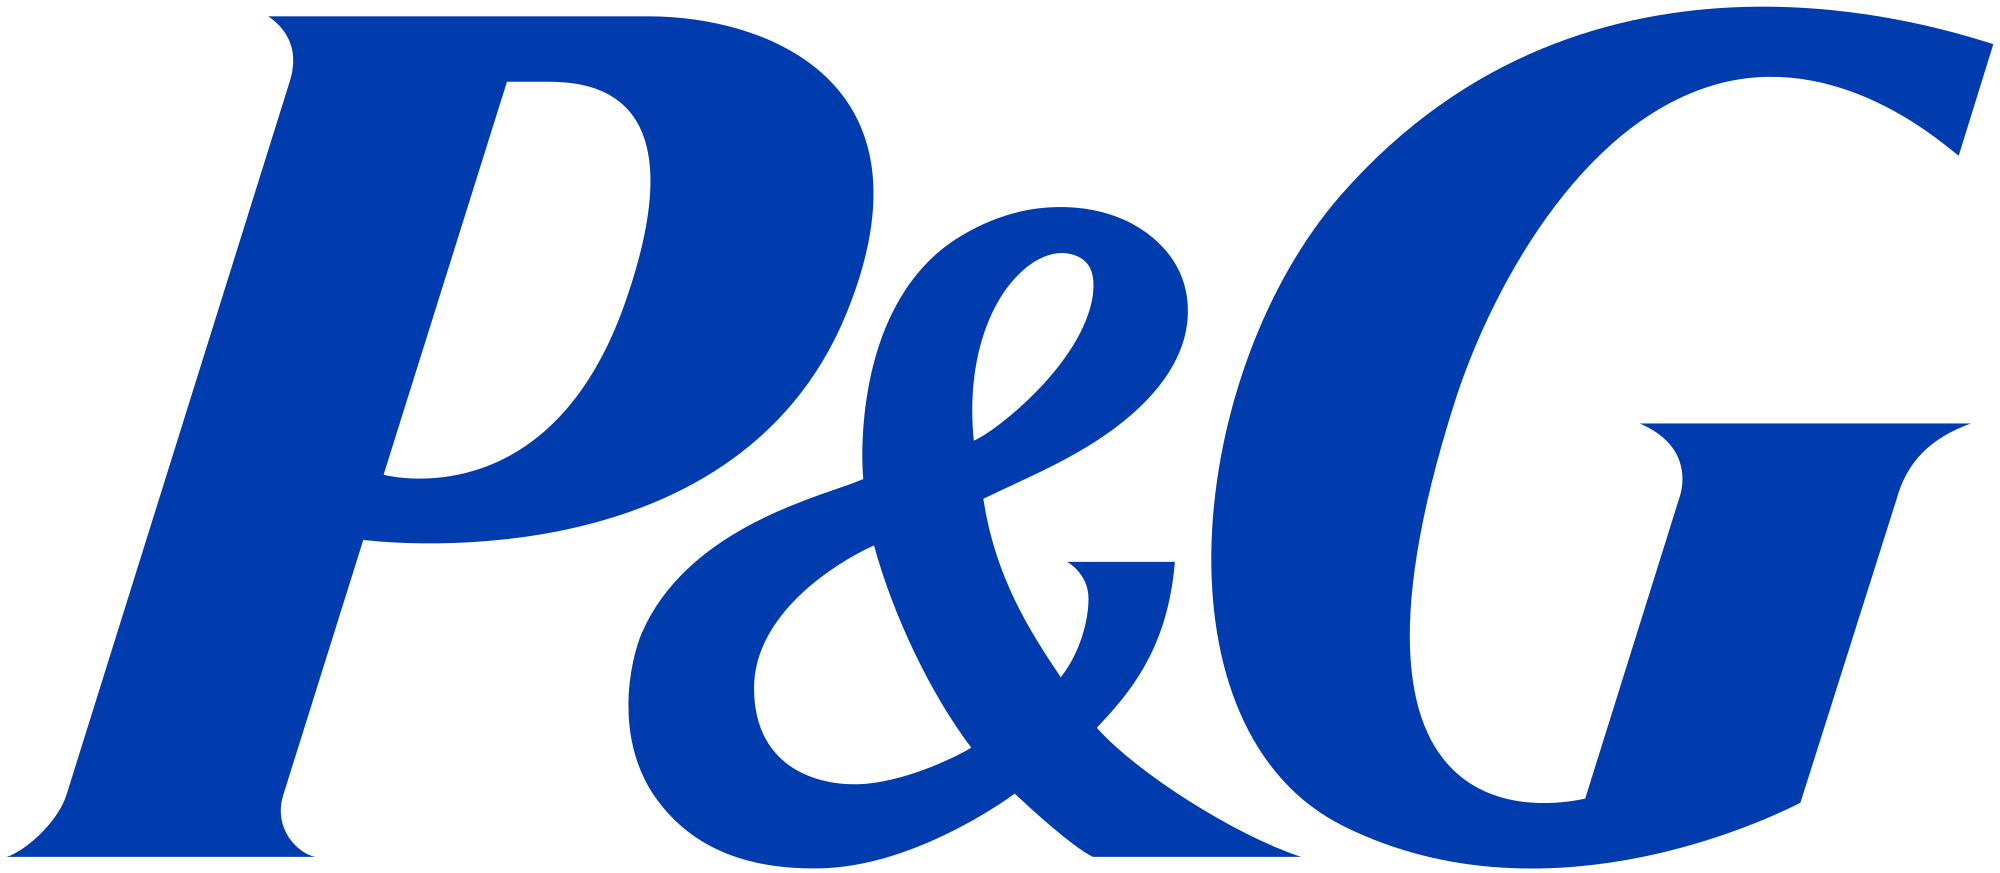 76h-p&g.png